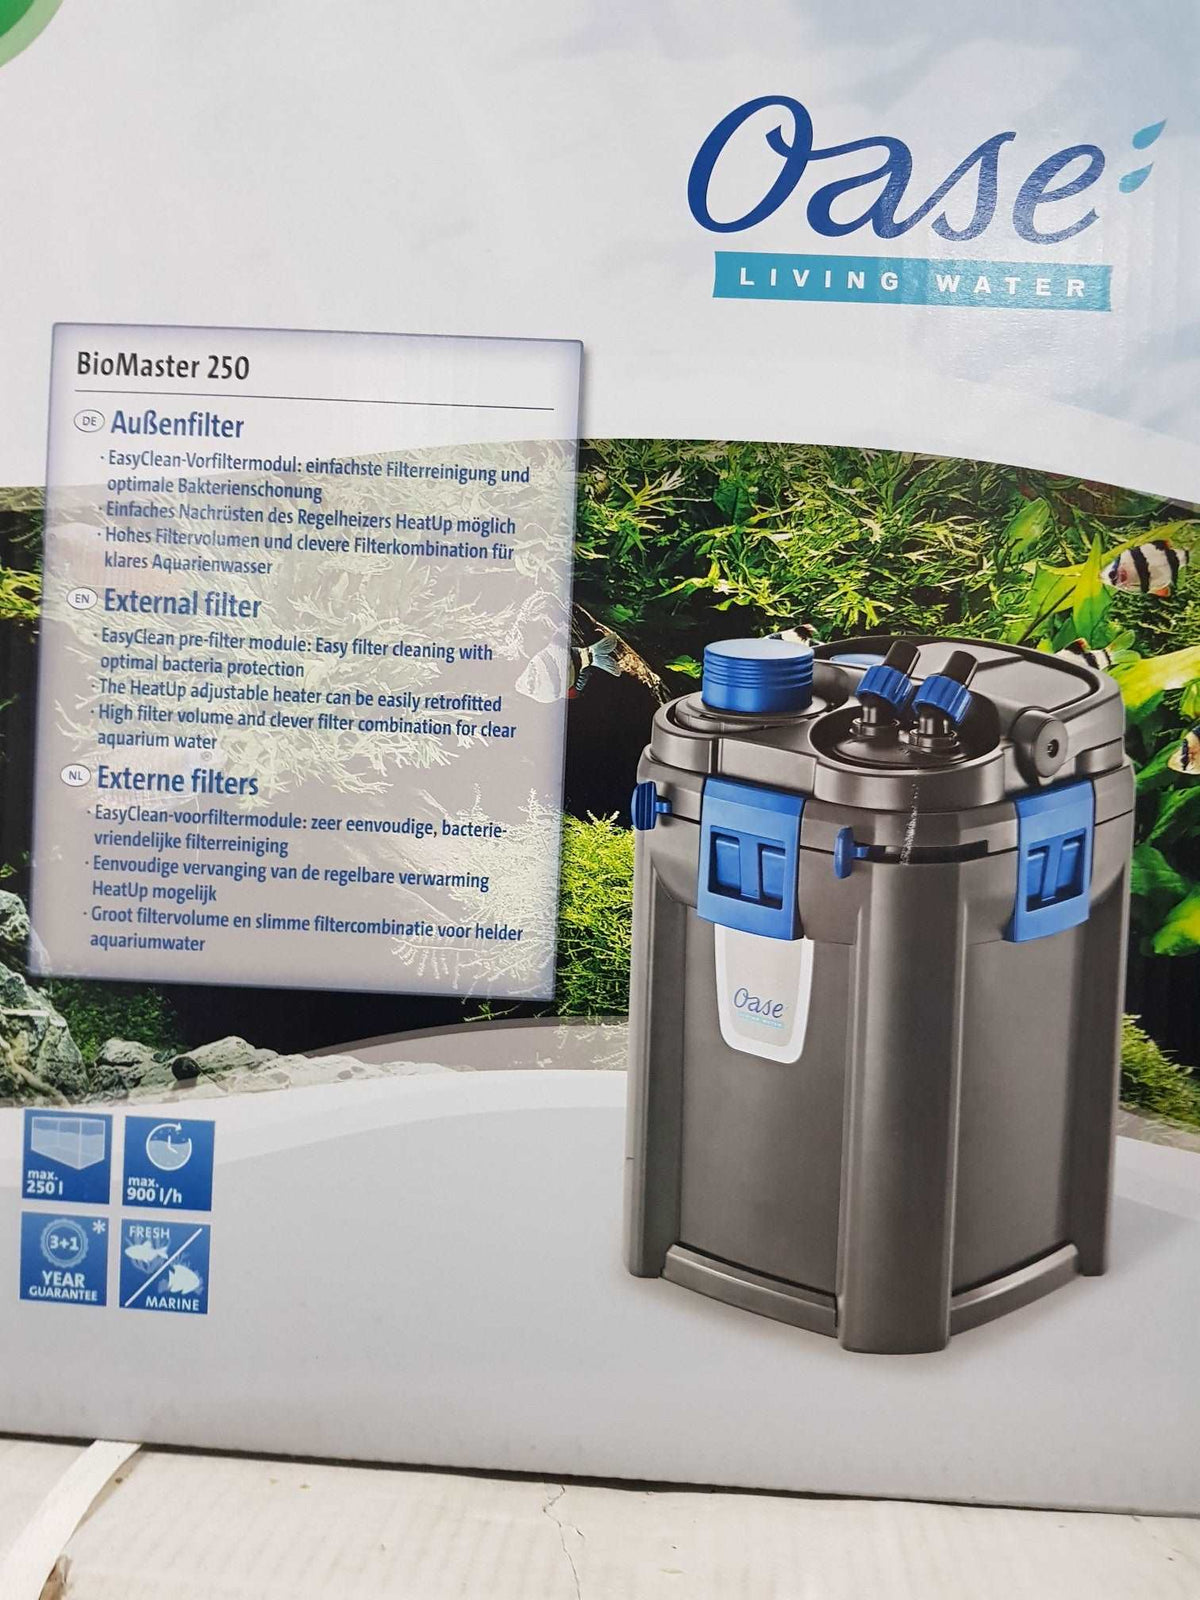 Oase Biomaster 250 canister filter for Aquariums up to 250lts